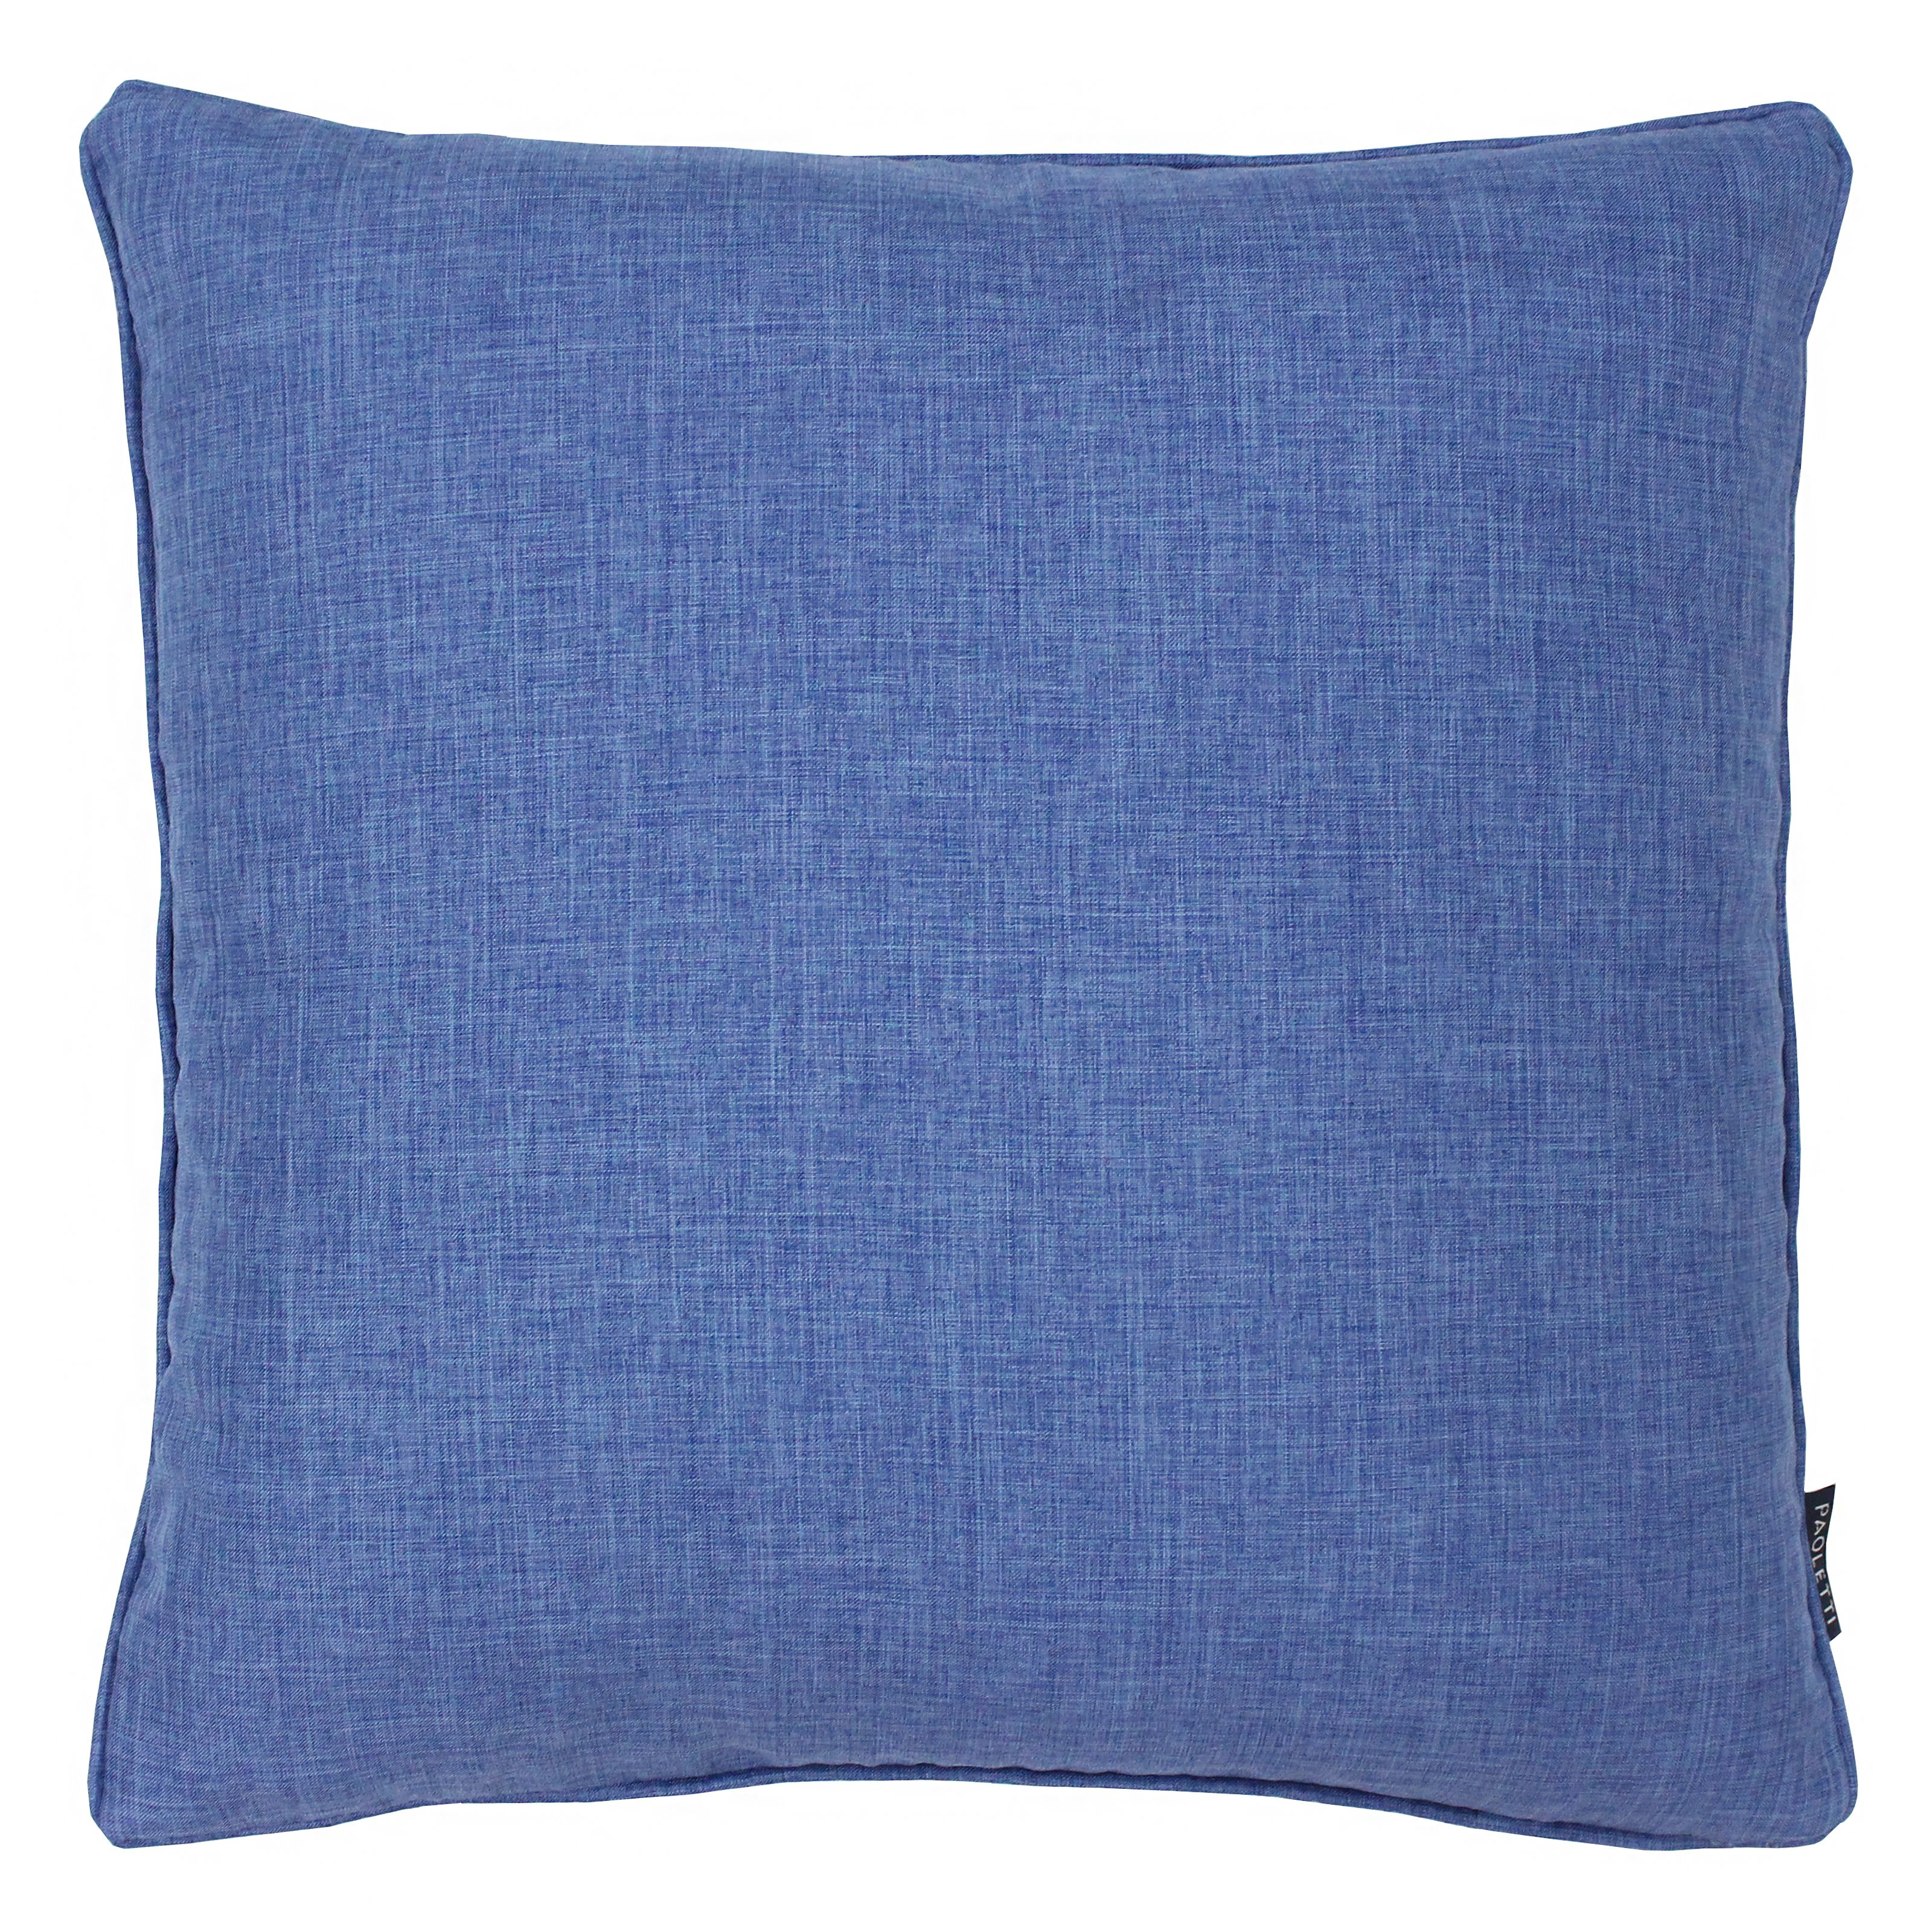 Colourful and practical the Eclipse Polyester Filled Cushion is an ideal choice. Available in a range of muted colours that will blend seamlessly into any environment these cushions are perfect for filling out sofas and chairs. The plain textured weave is presented on both sides making this gorgeous cushion reversible. Complete with piped edges and a hidden zip closure to keep your cushion pad safe and secure. Made of 100% polyester these cushions are robust making them a great option for households with children or pets. To keep this cushion looking as good as the day you first bought them dry clean only. Do not iron and line dry for the best results. Specifically made to match with the Eclipse blackout curtains and blinds.